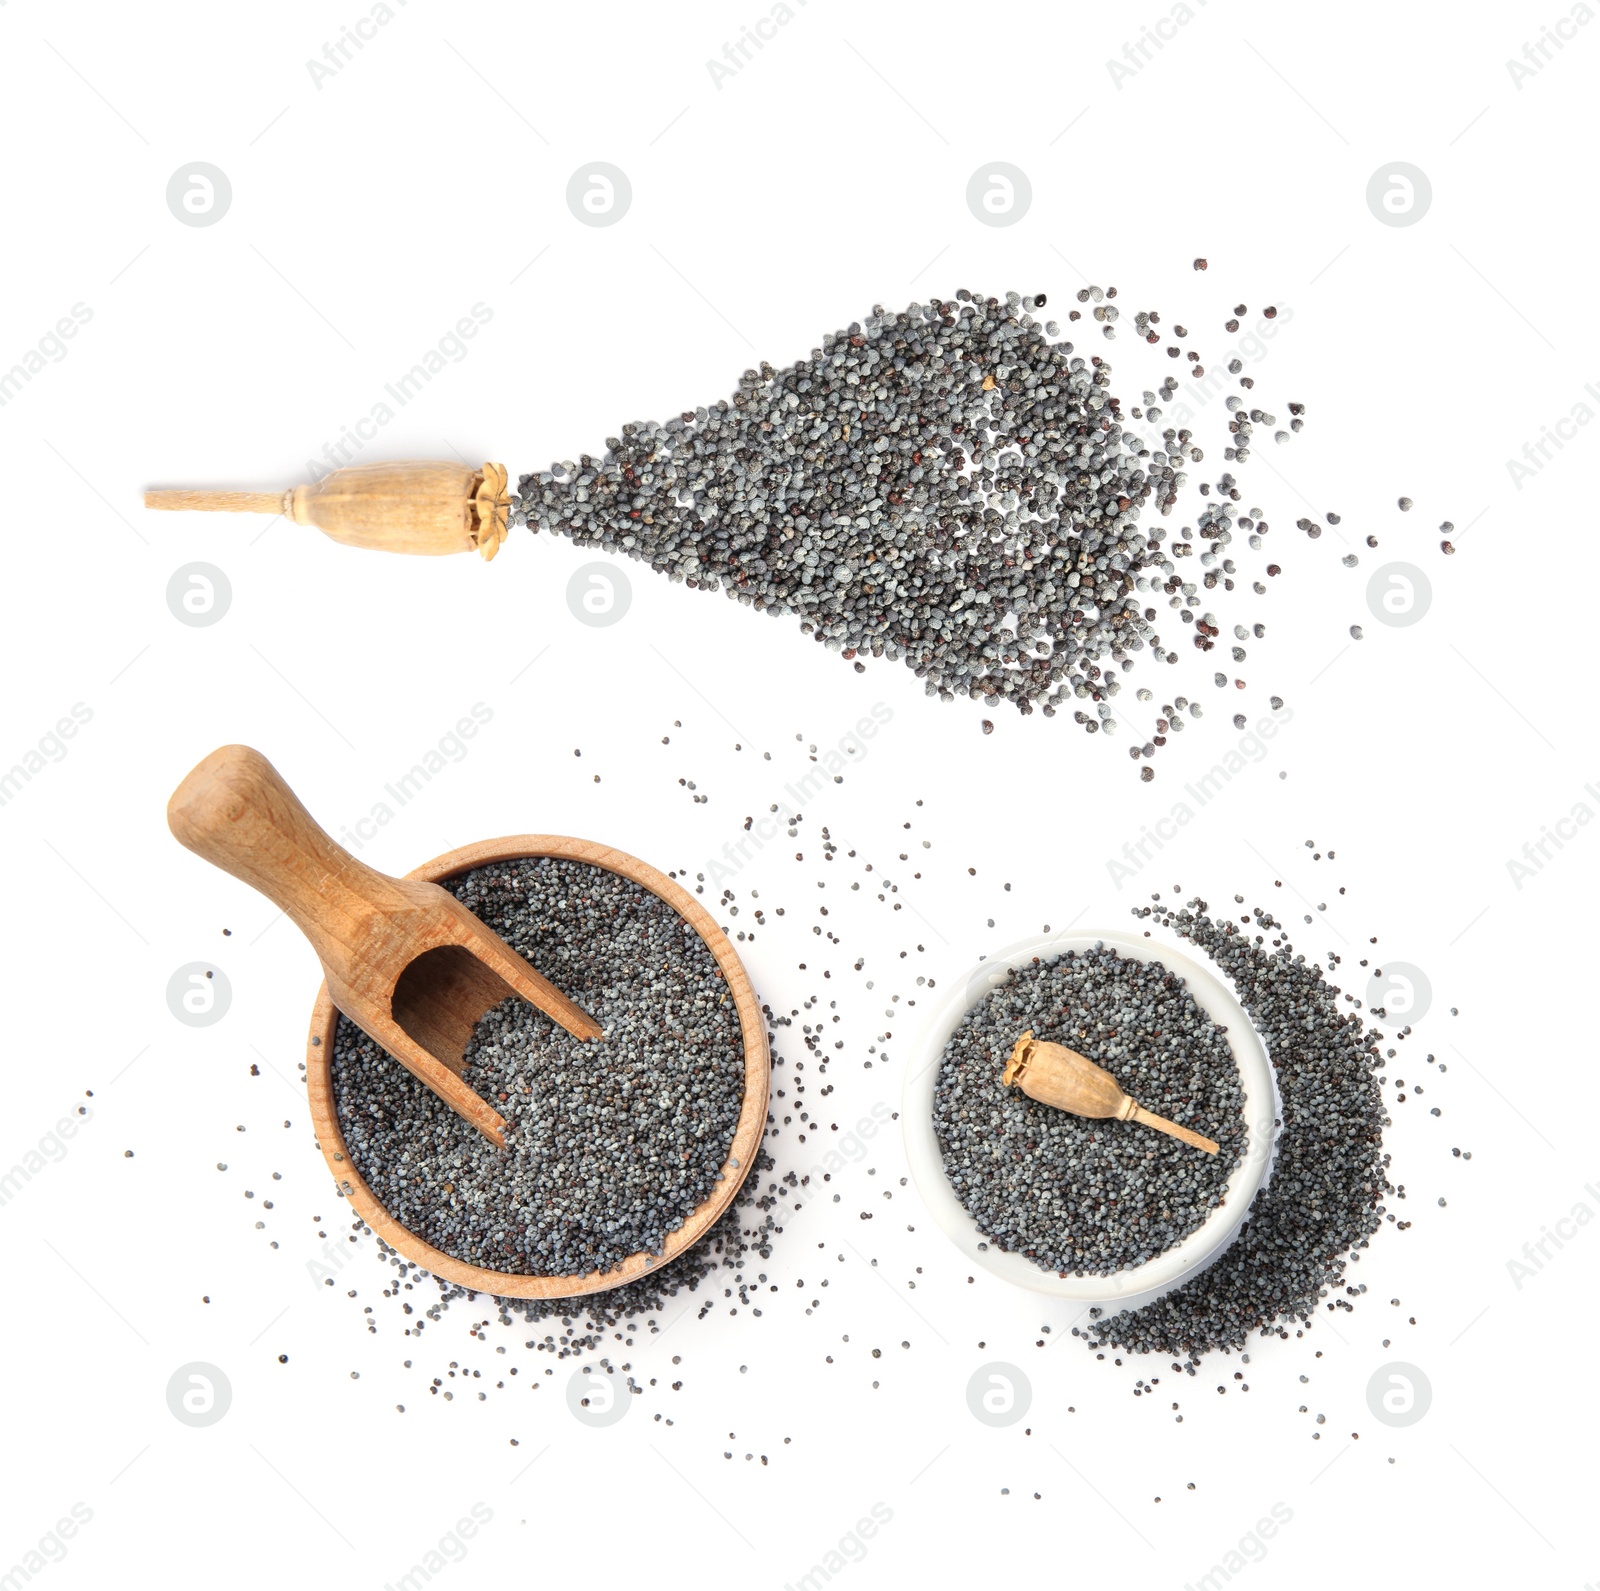 Image of Collage with poppy seeds and dry pods on white background, top view